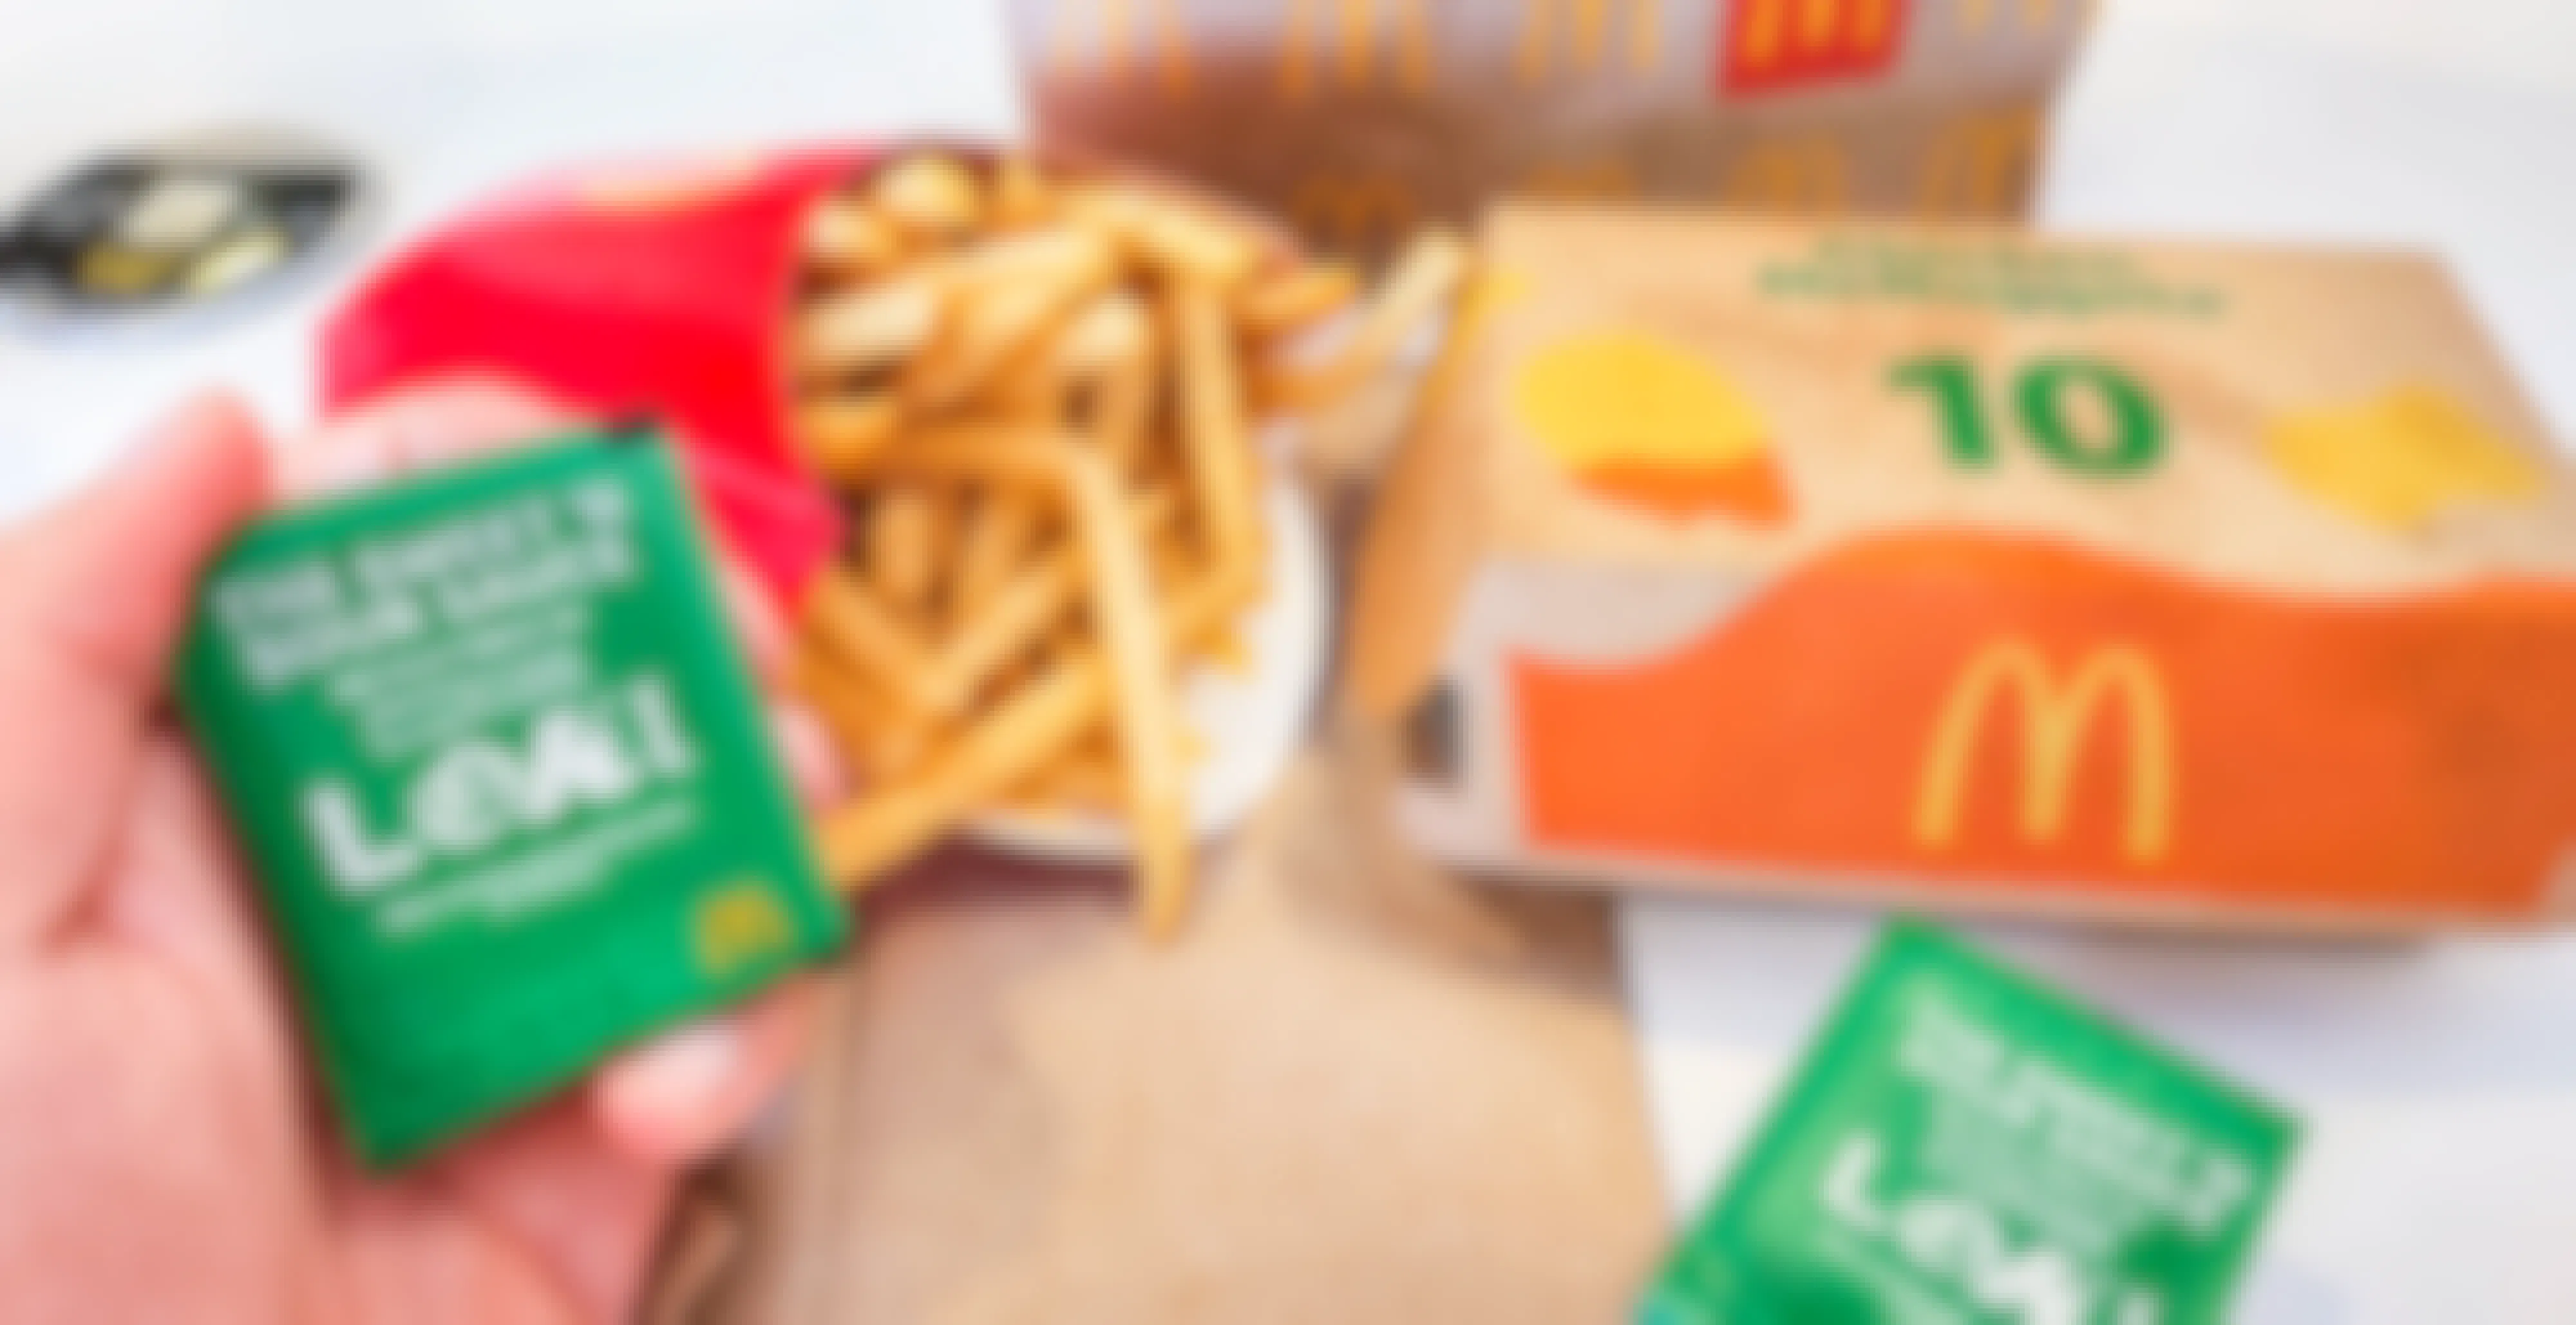 McDonald's & Loki Are Bringing Us a New Sauce & Meals Starting Today